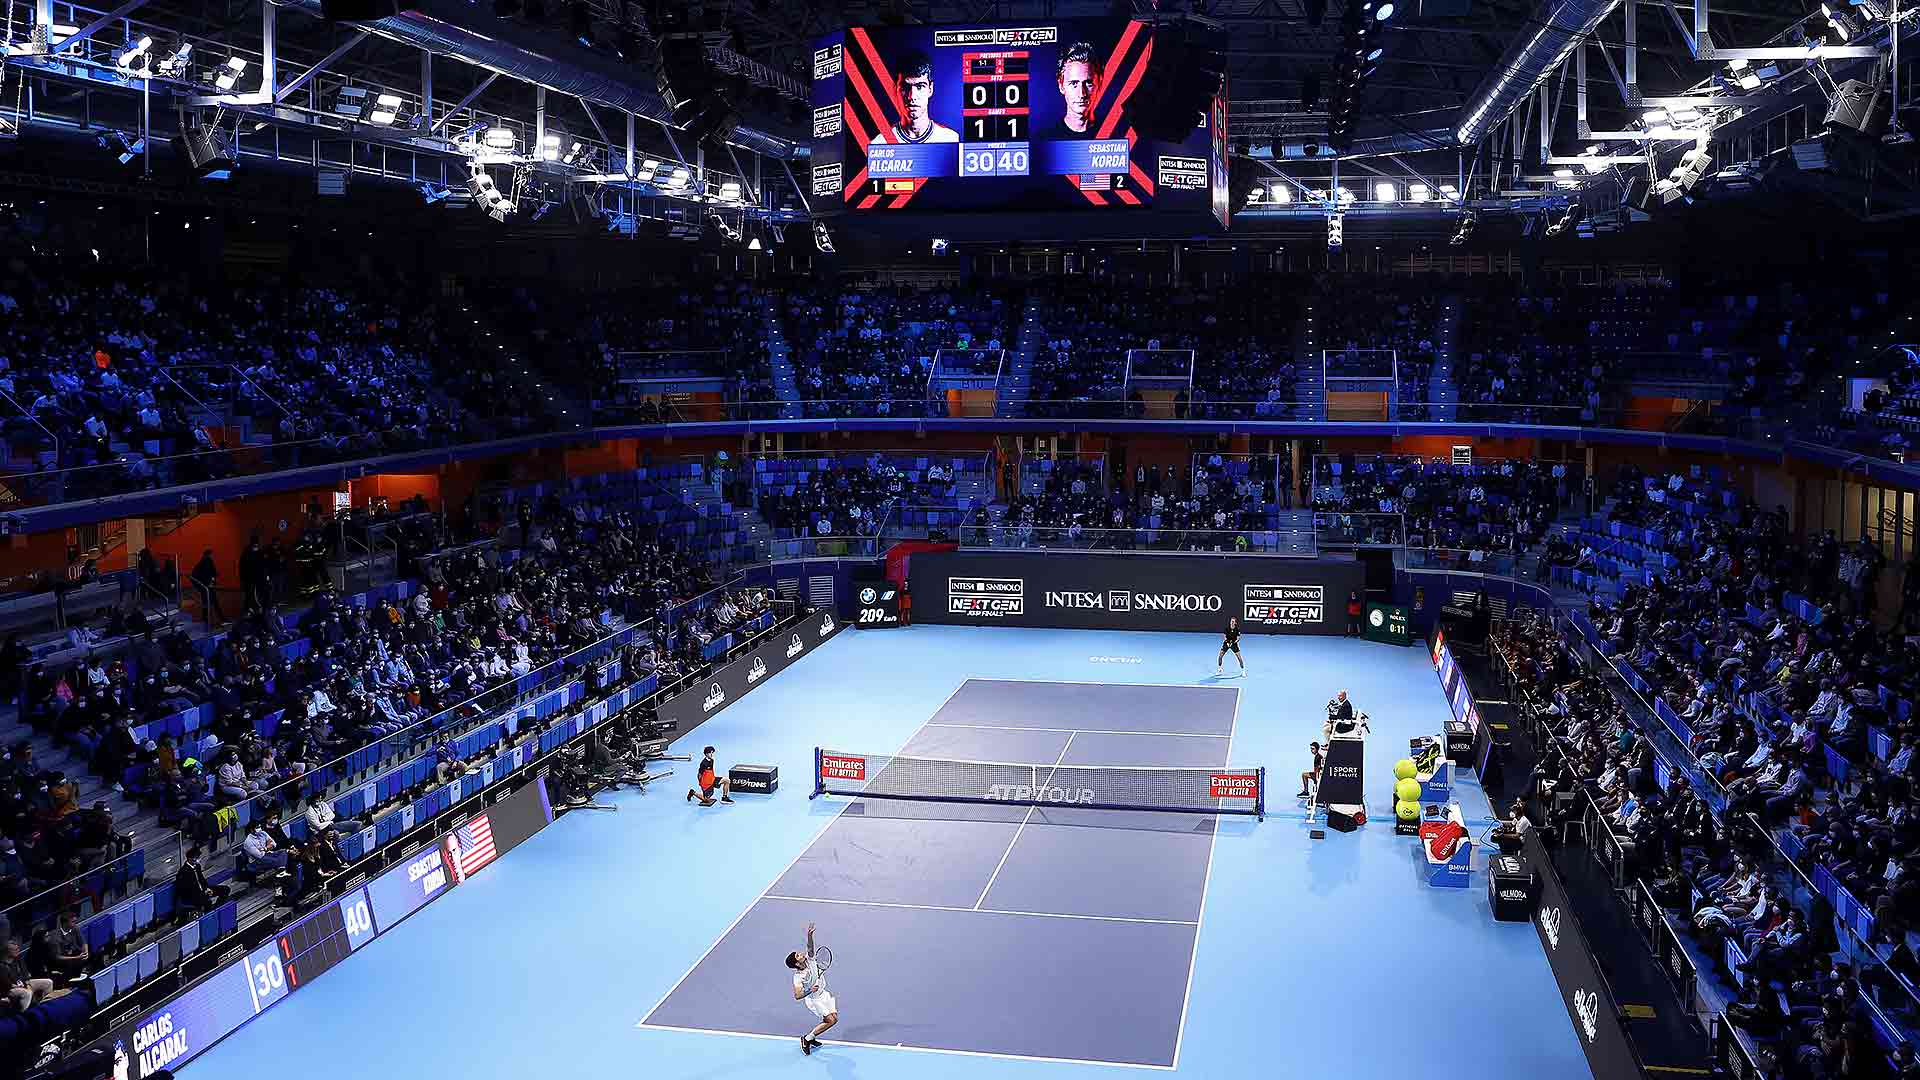 The 2022 Intesa Sanpaolo Next Gen ATP Finals will be held from 8-12 November in Milan.